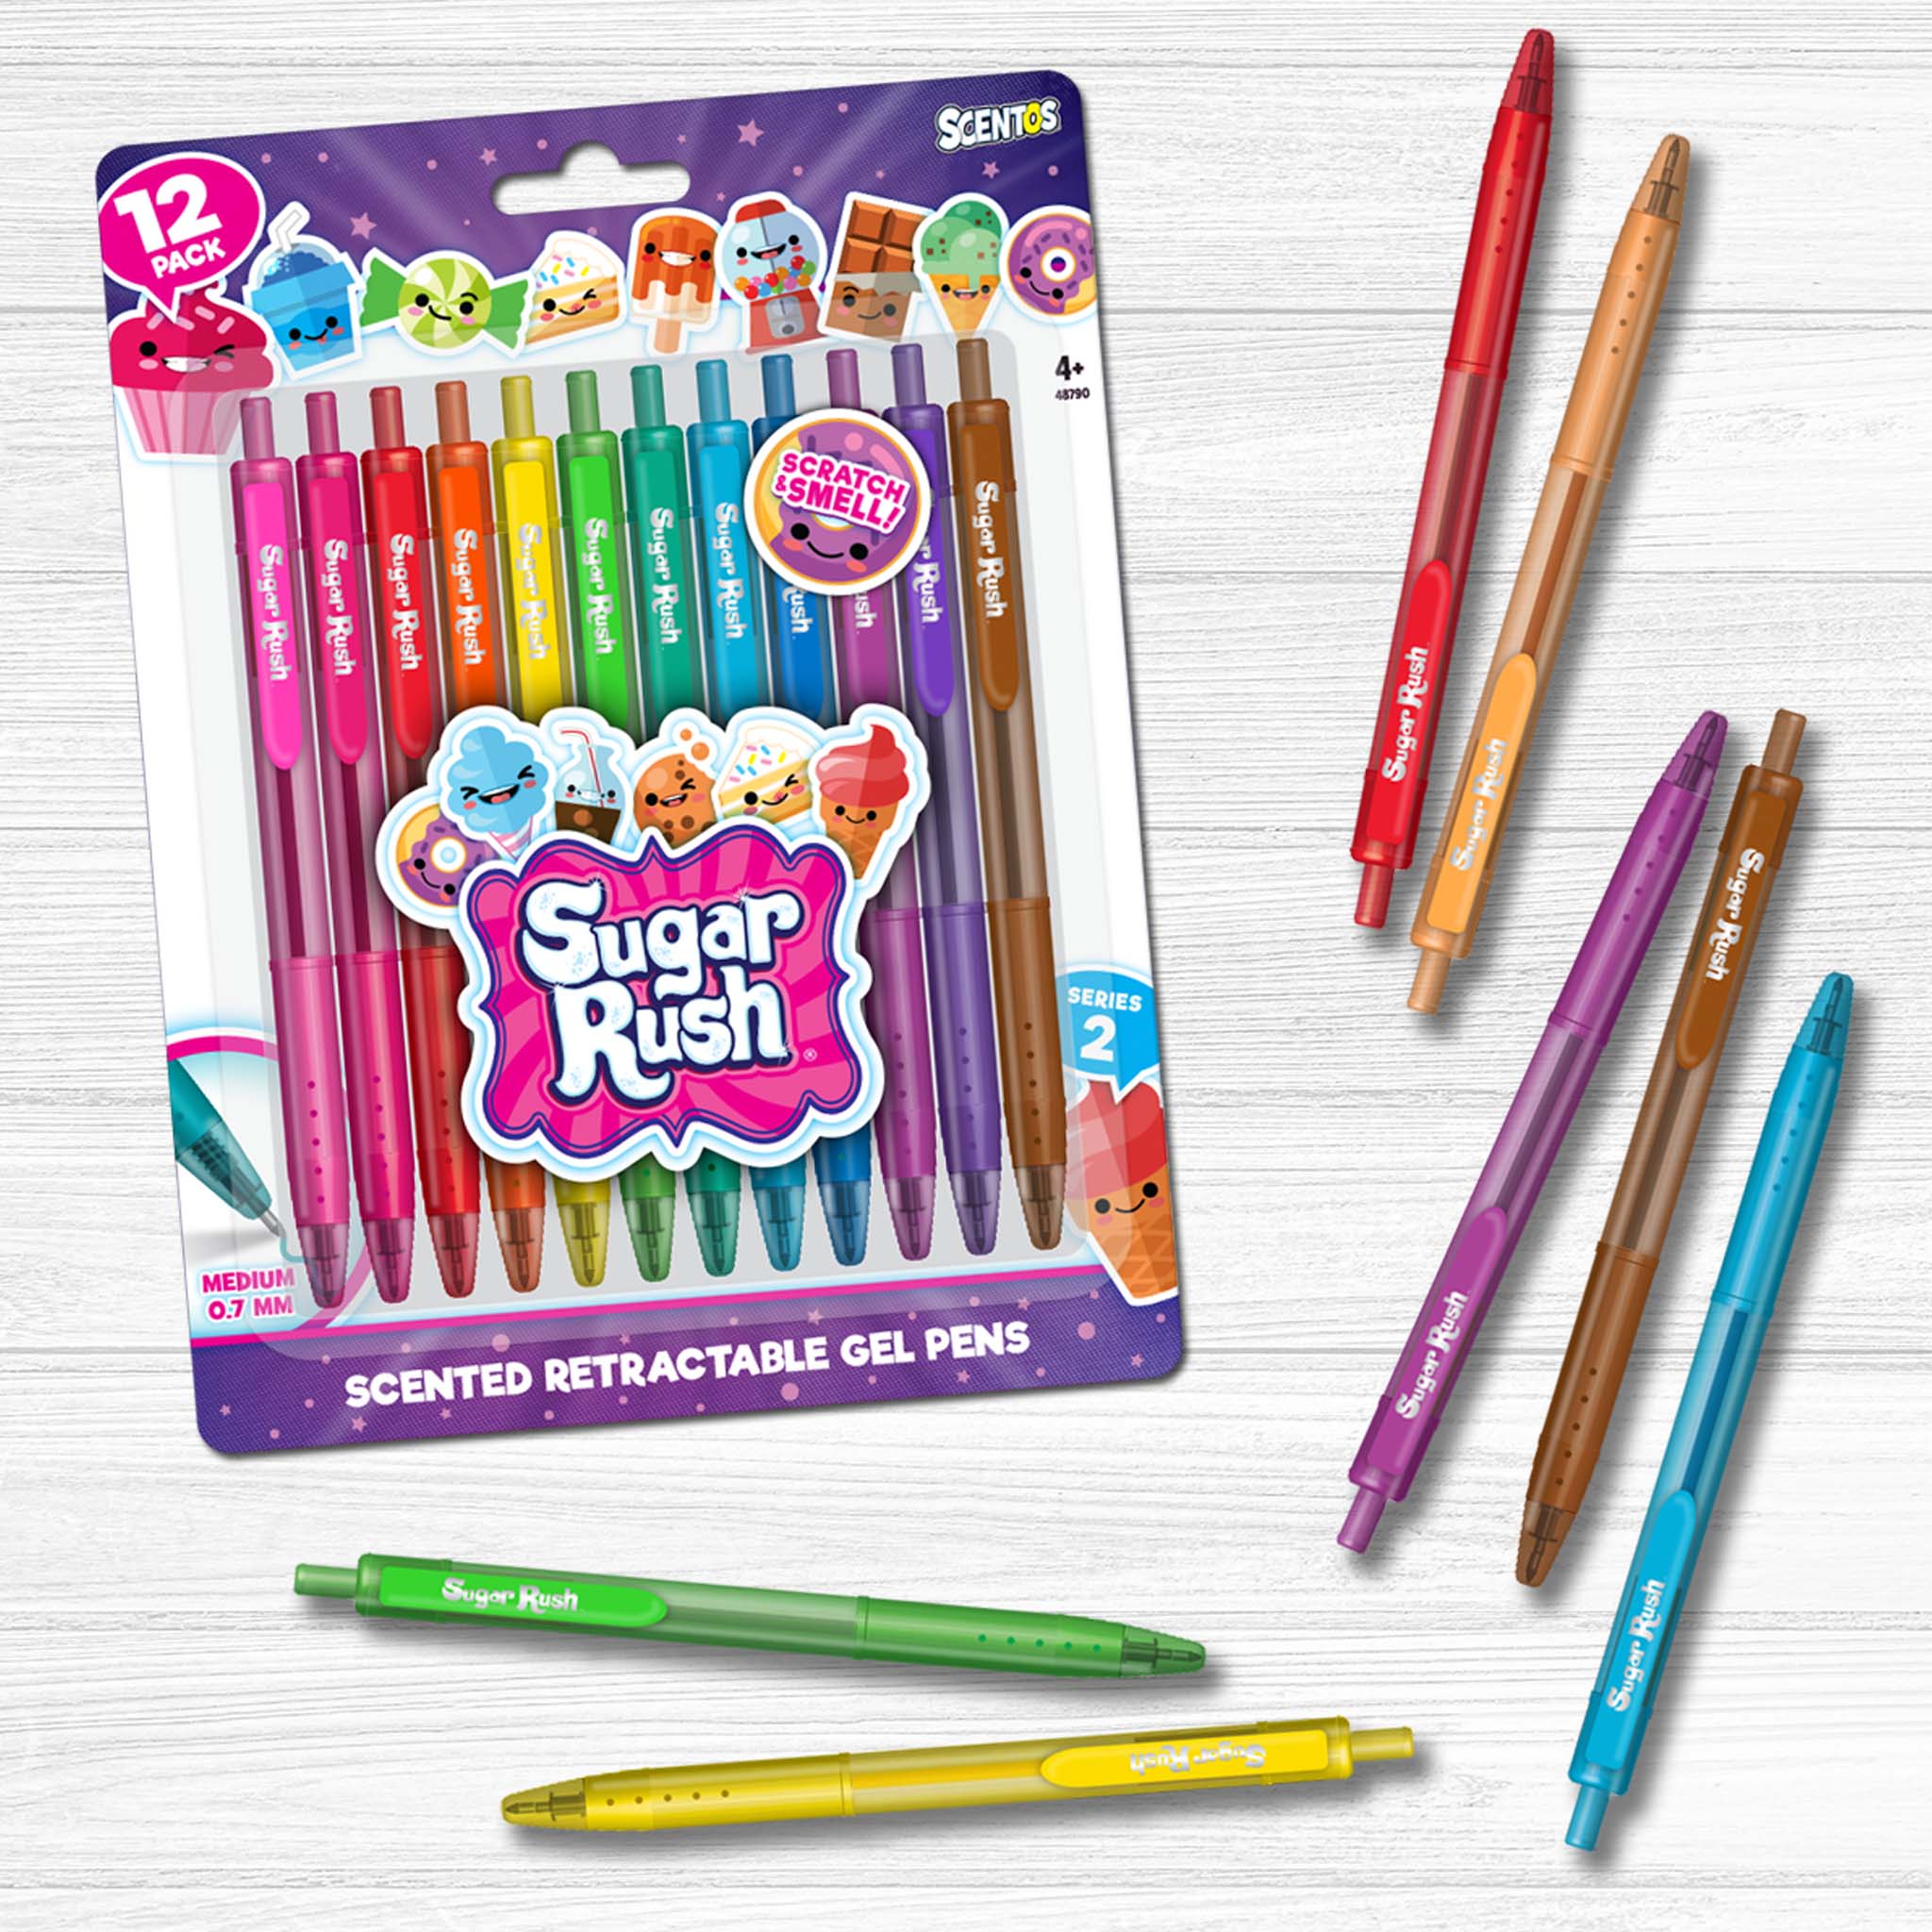  Scentos Sugar Rush Colored Gel Pens For Kids - Candy Scented  Pens - Medium Point Gel Pens For Coloring - For Ages 4 And Up - 12 Count